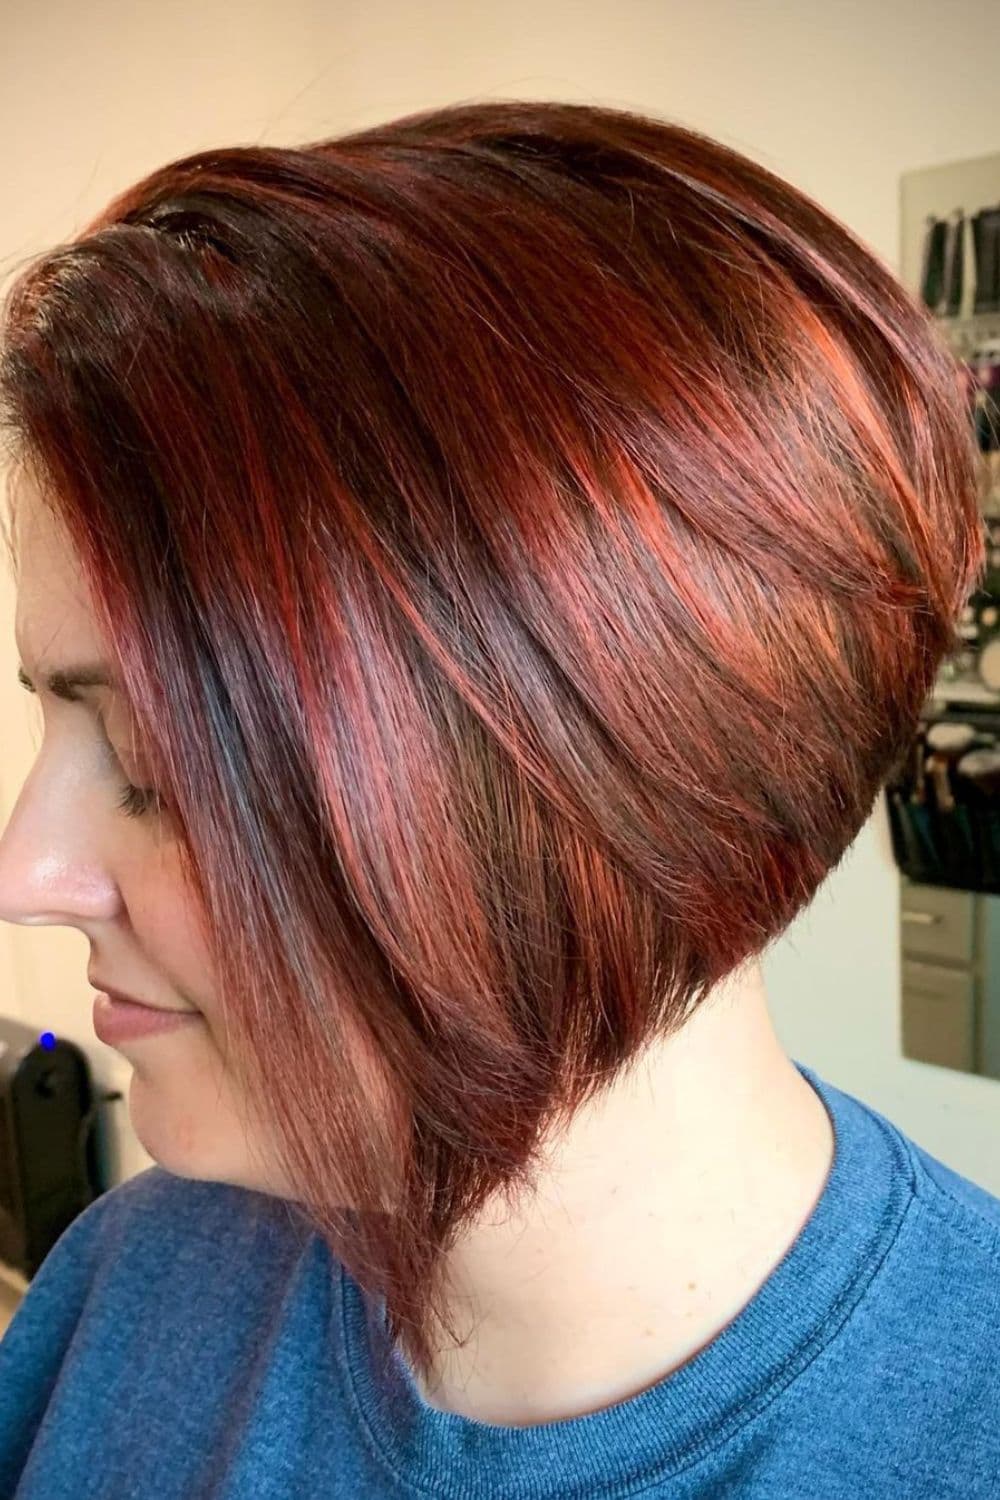 A woman with a stacked bob cut and red highlights.